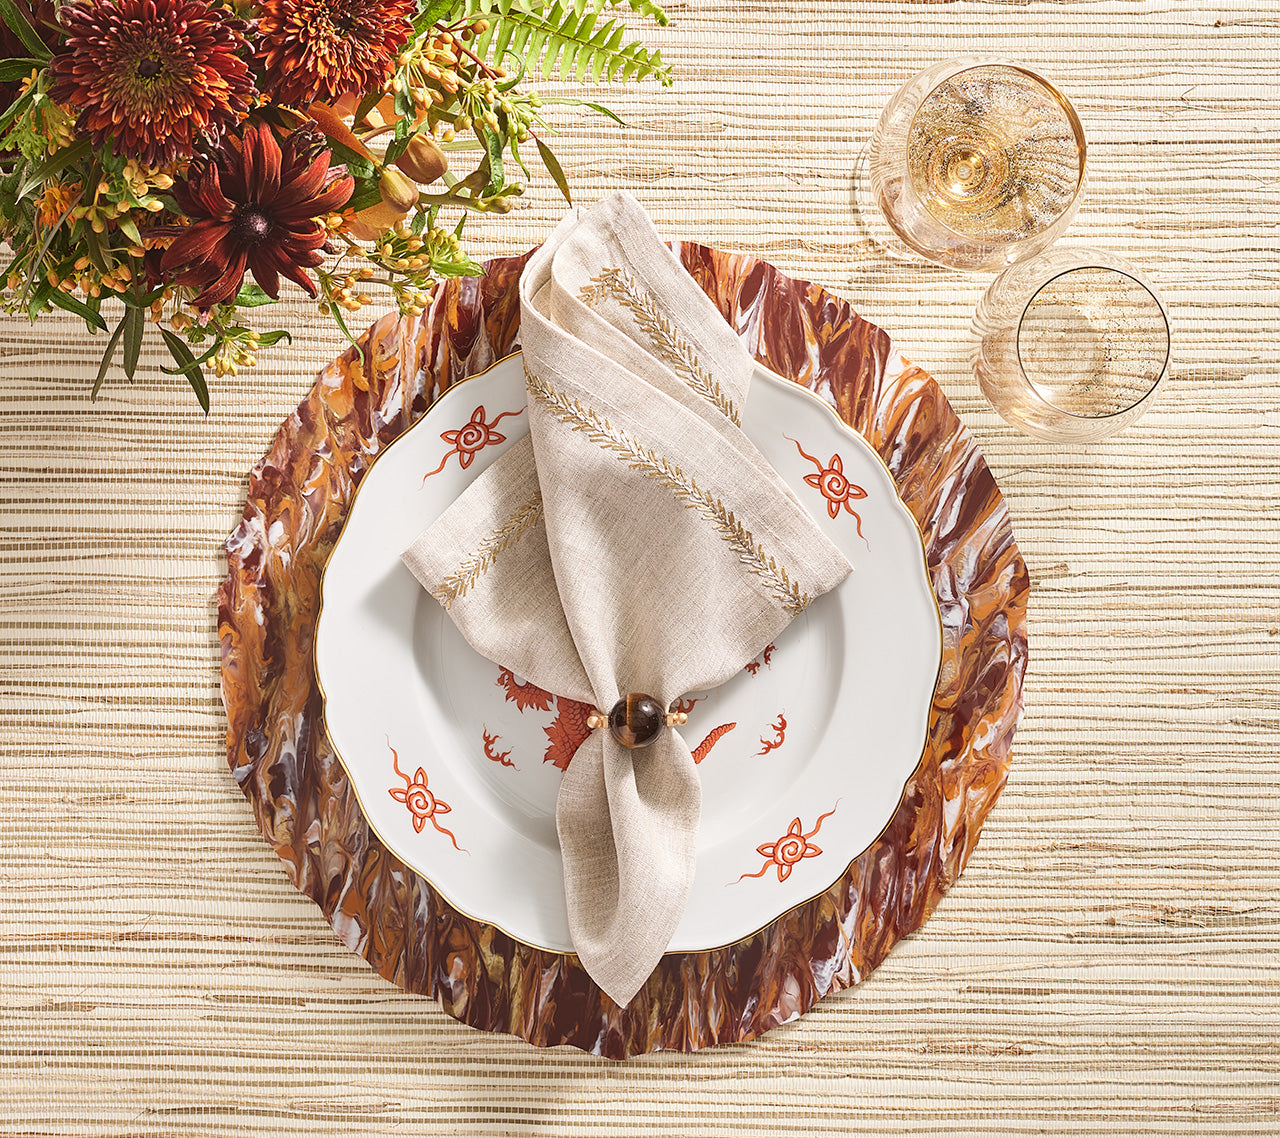 Sample: Marbled Placemat in Cranberry & Orange, Set of 4